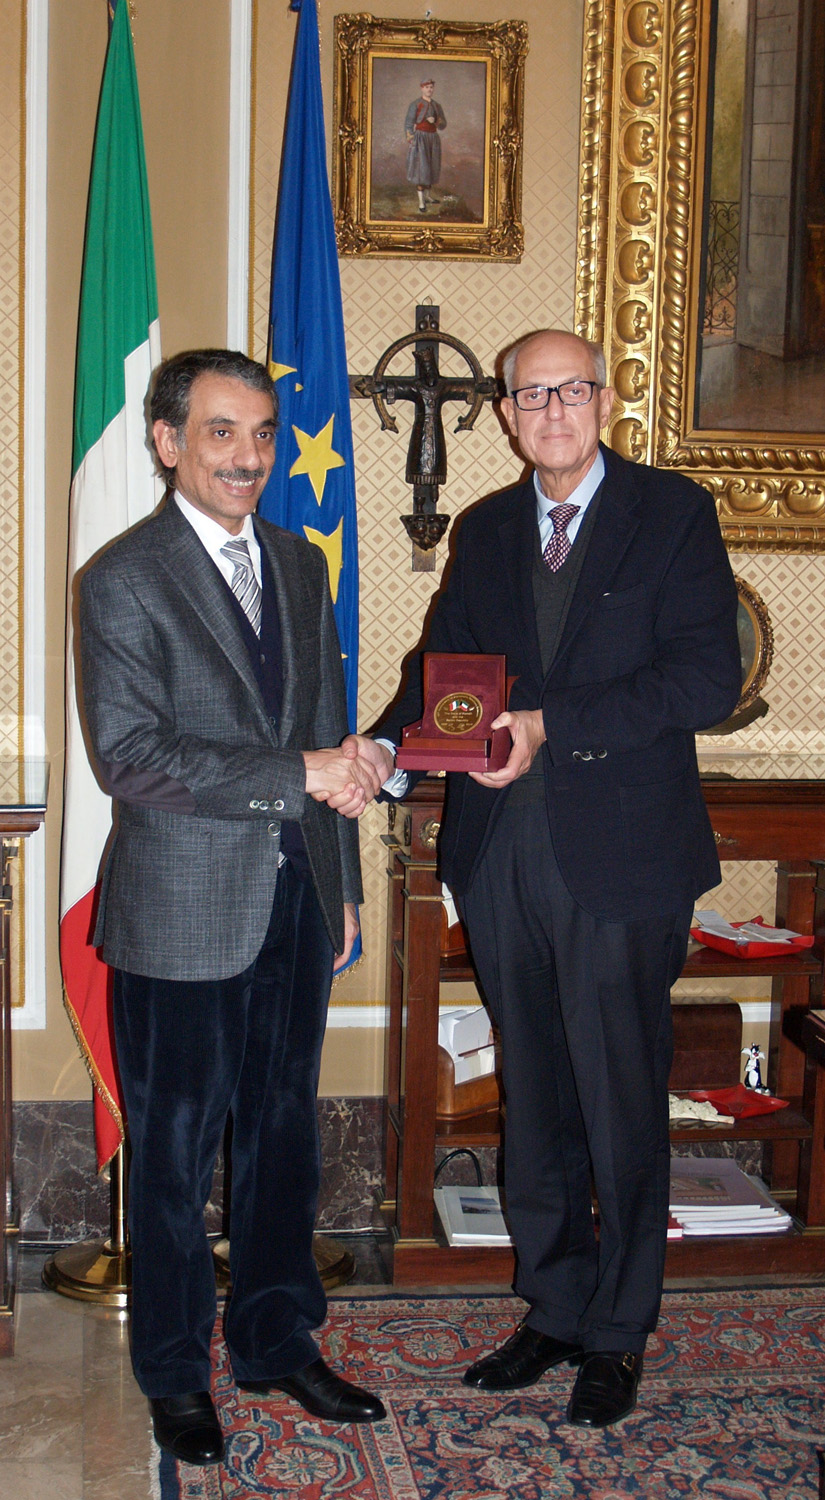 Kuwait's General Consul in Milan and Northern Italy Abdulnasser Bukhadhour meets the Prefect of Milan Francesco Paolo Tronca